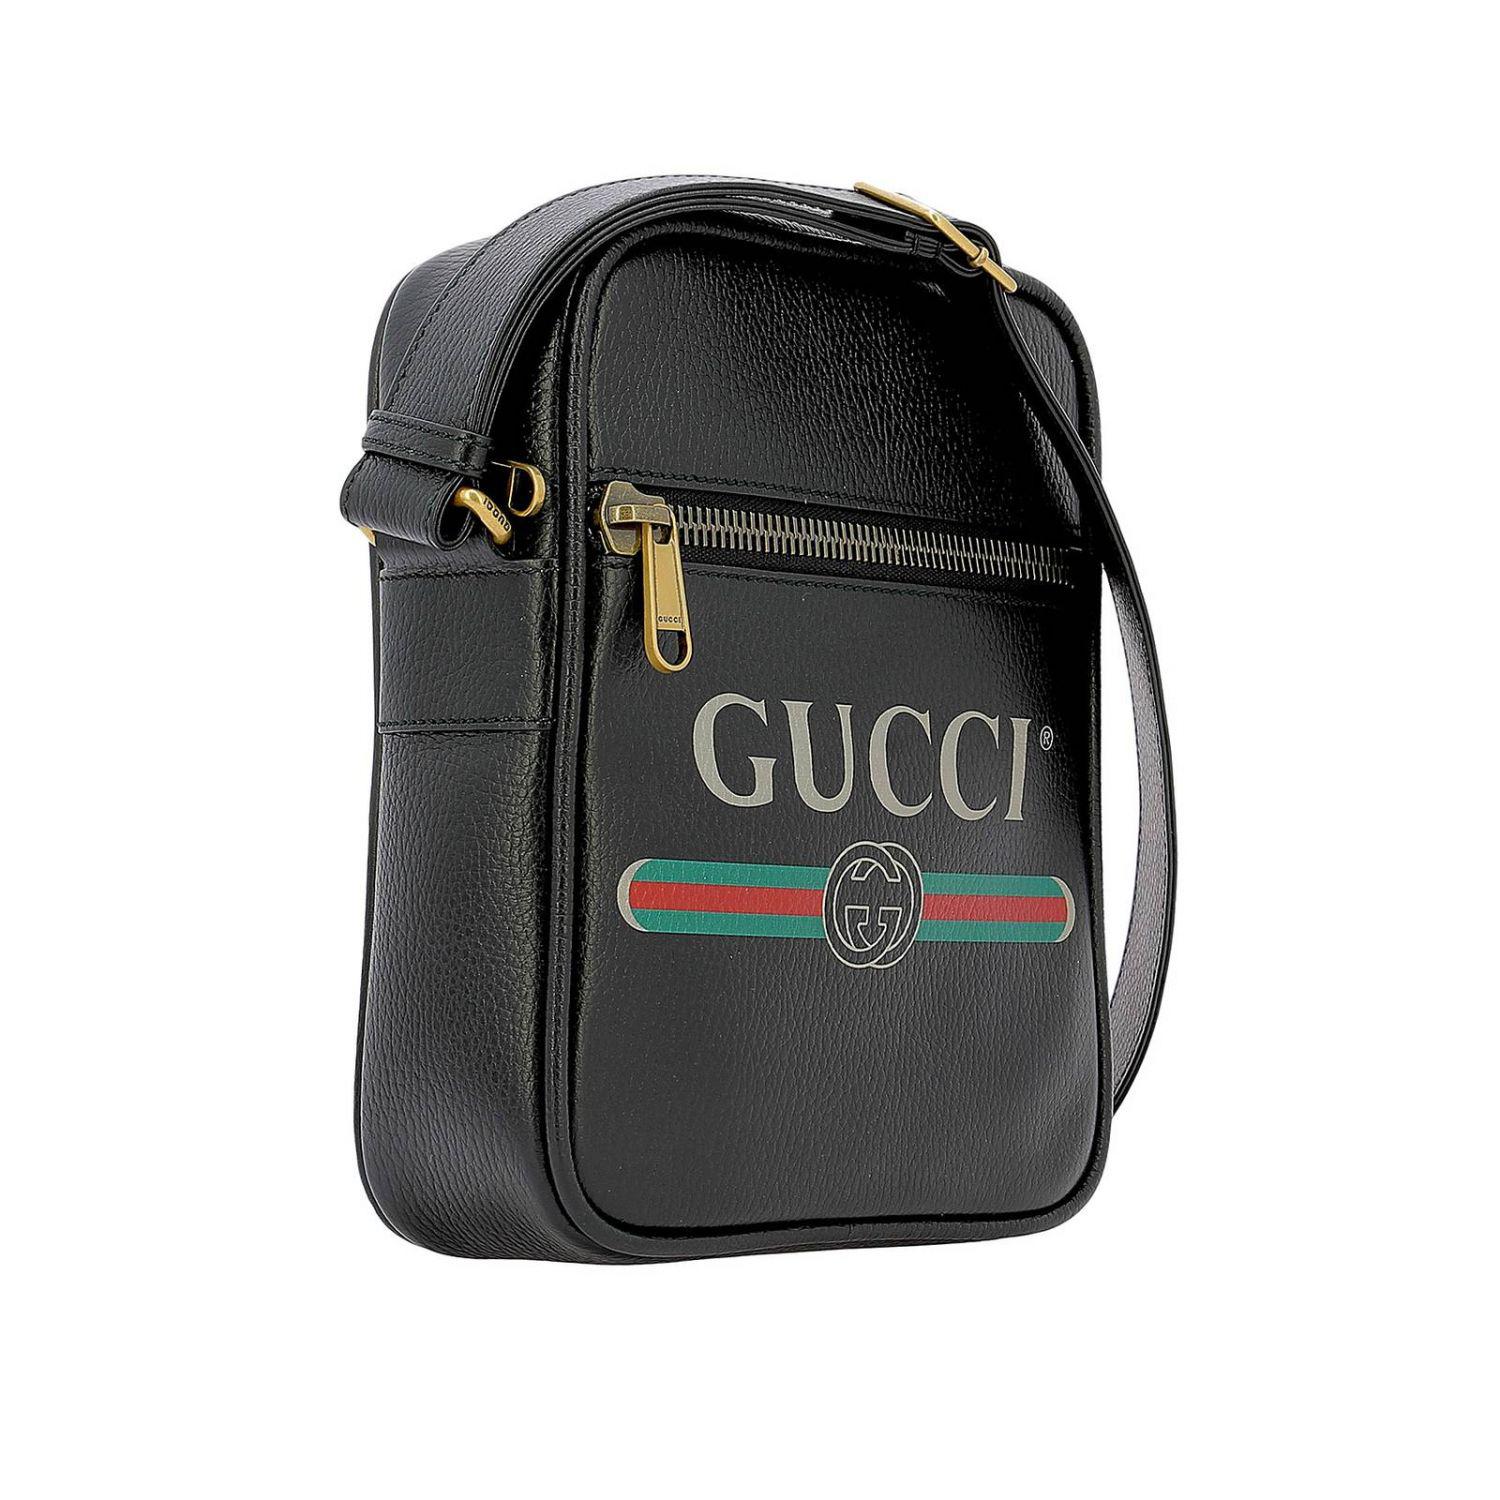 black gucci shoulder bag mens,Save up to 19%,www.ilcascinone.com